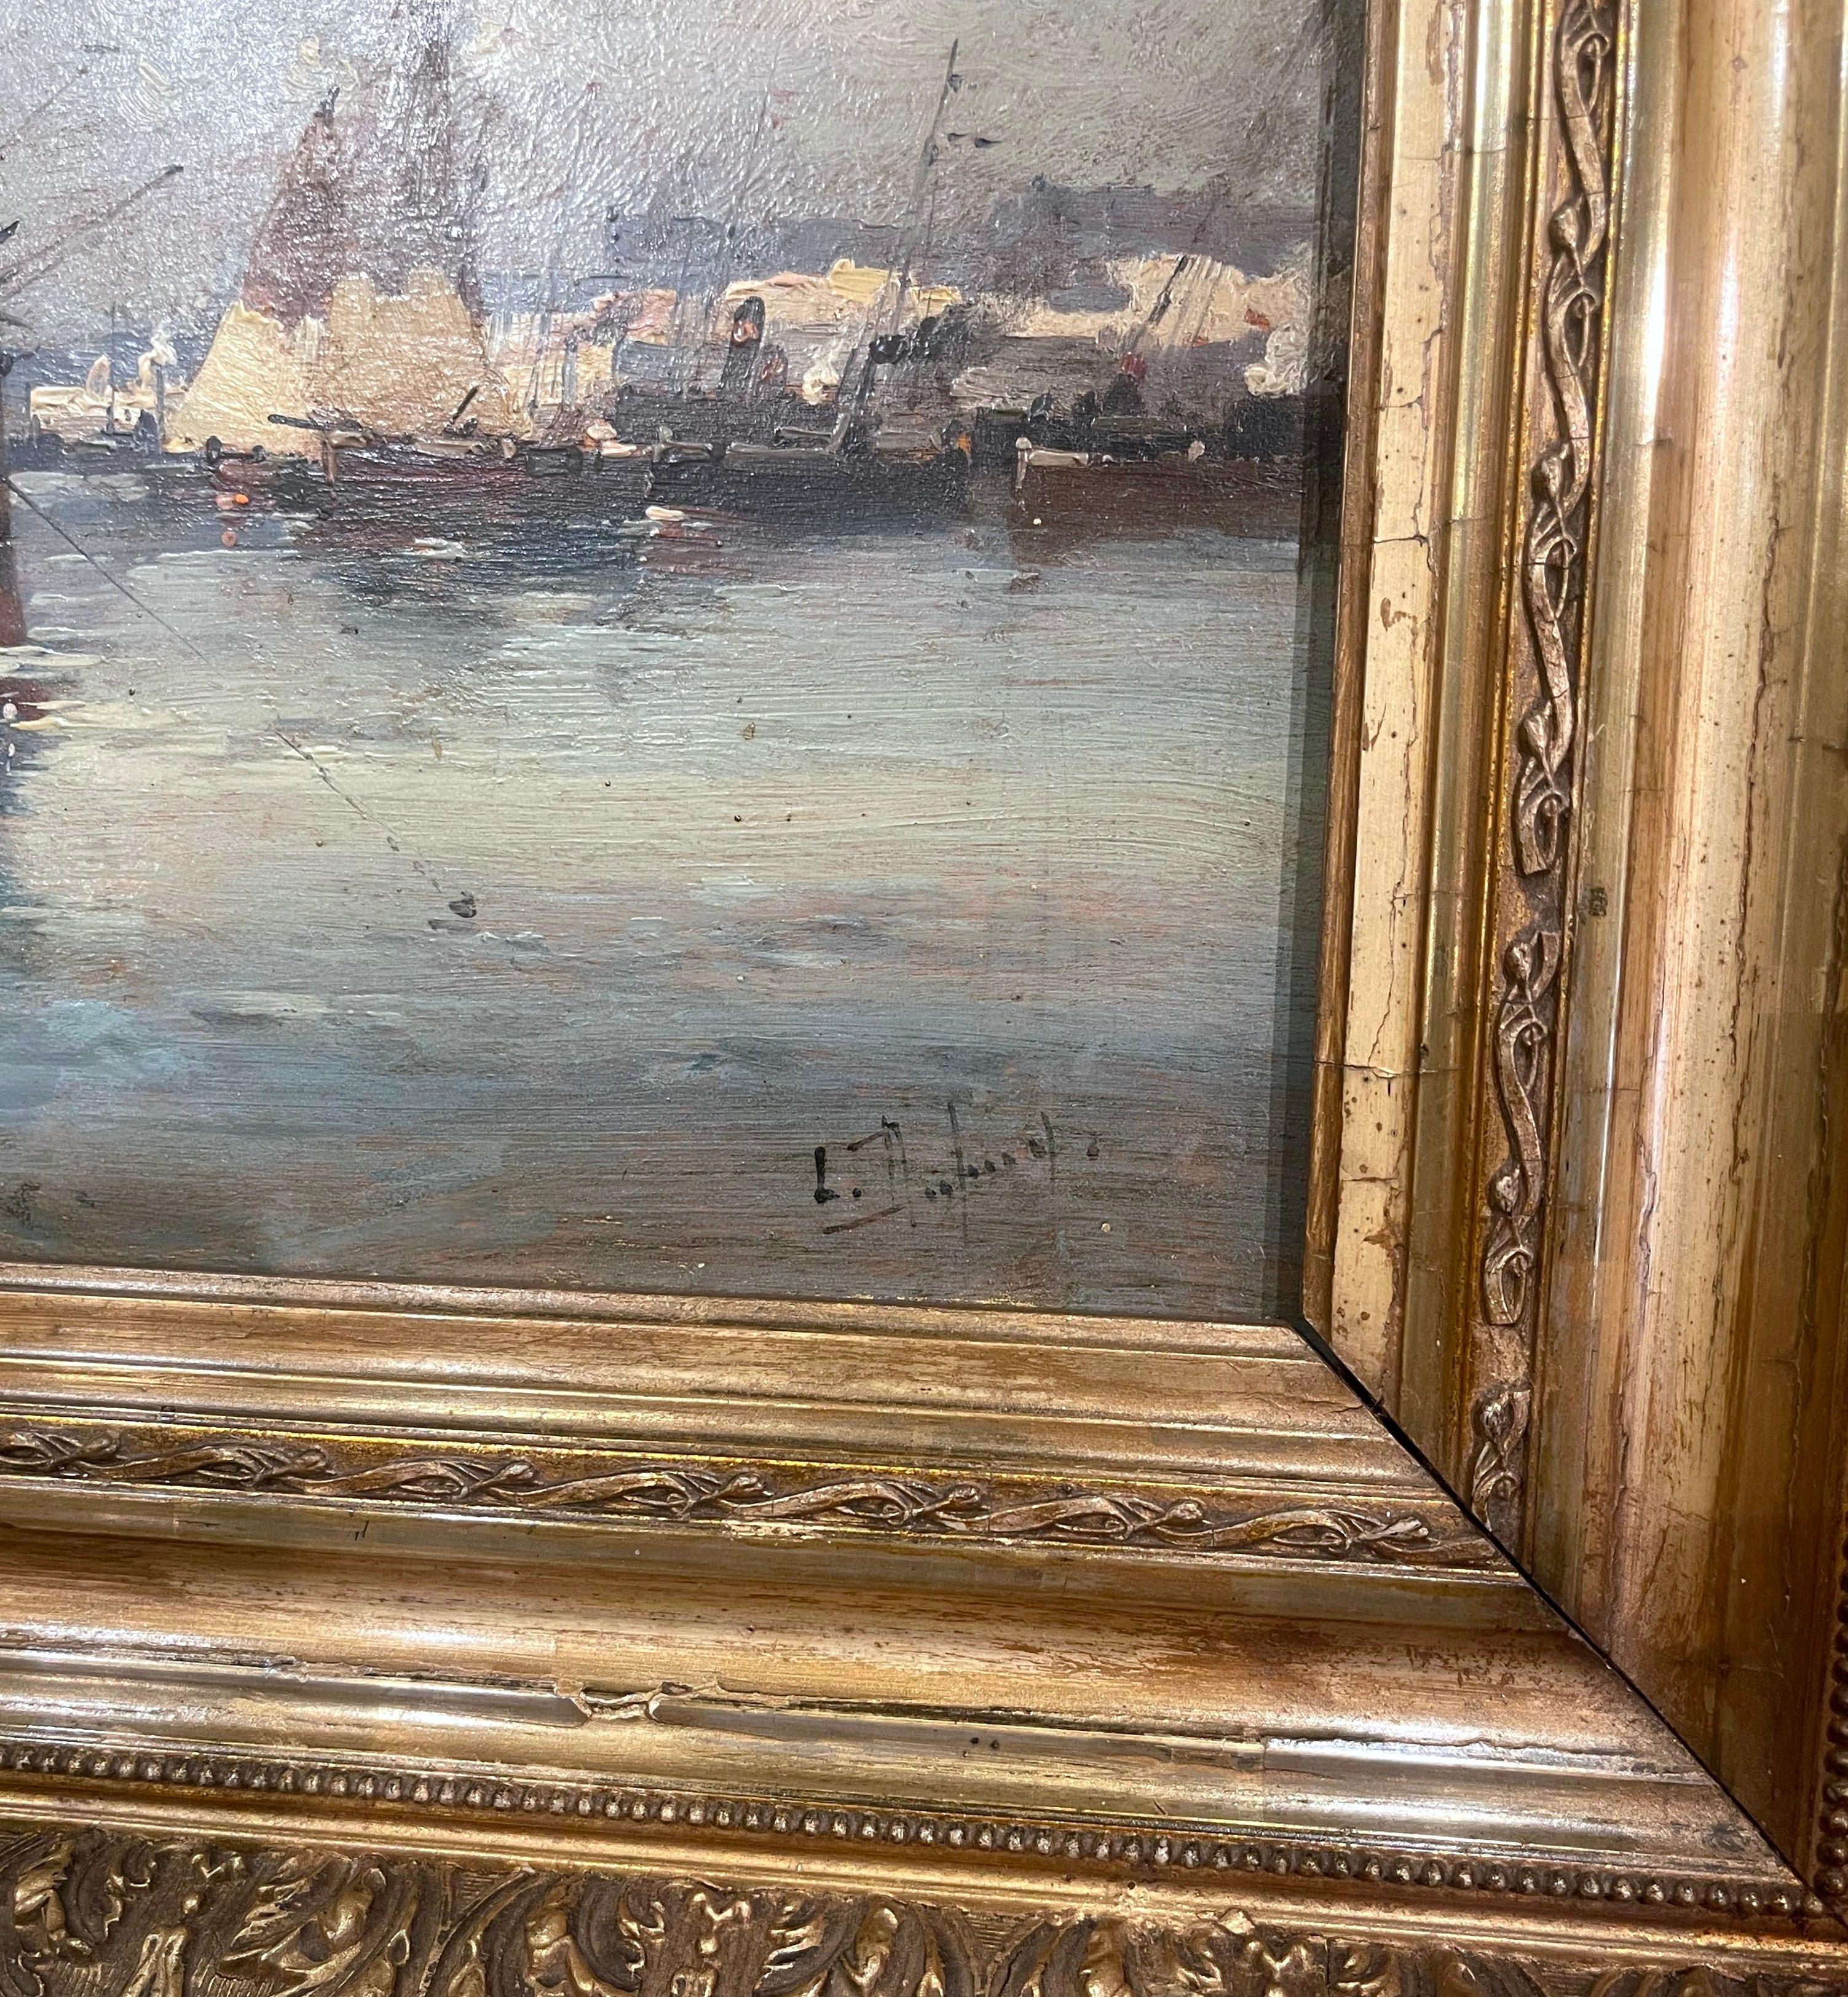 Carved 19th Century Oil Ship Painting in Gilt Frame Signed Dupuy for E. Galien-Laloue